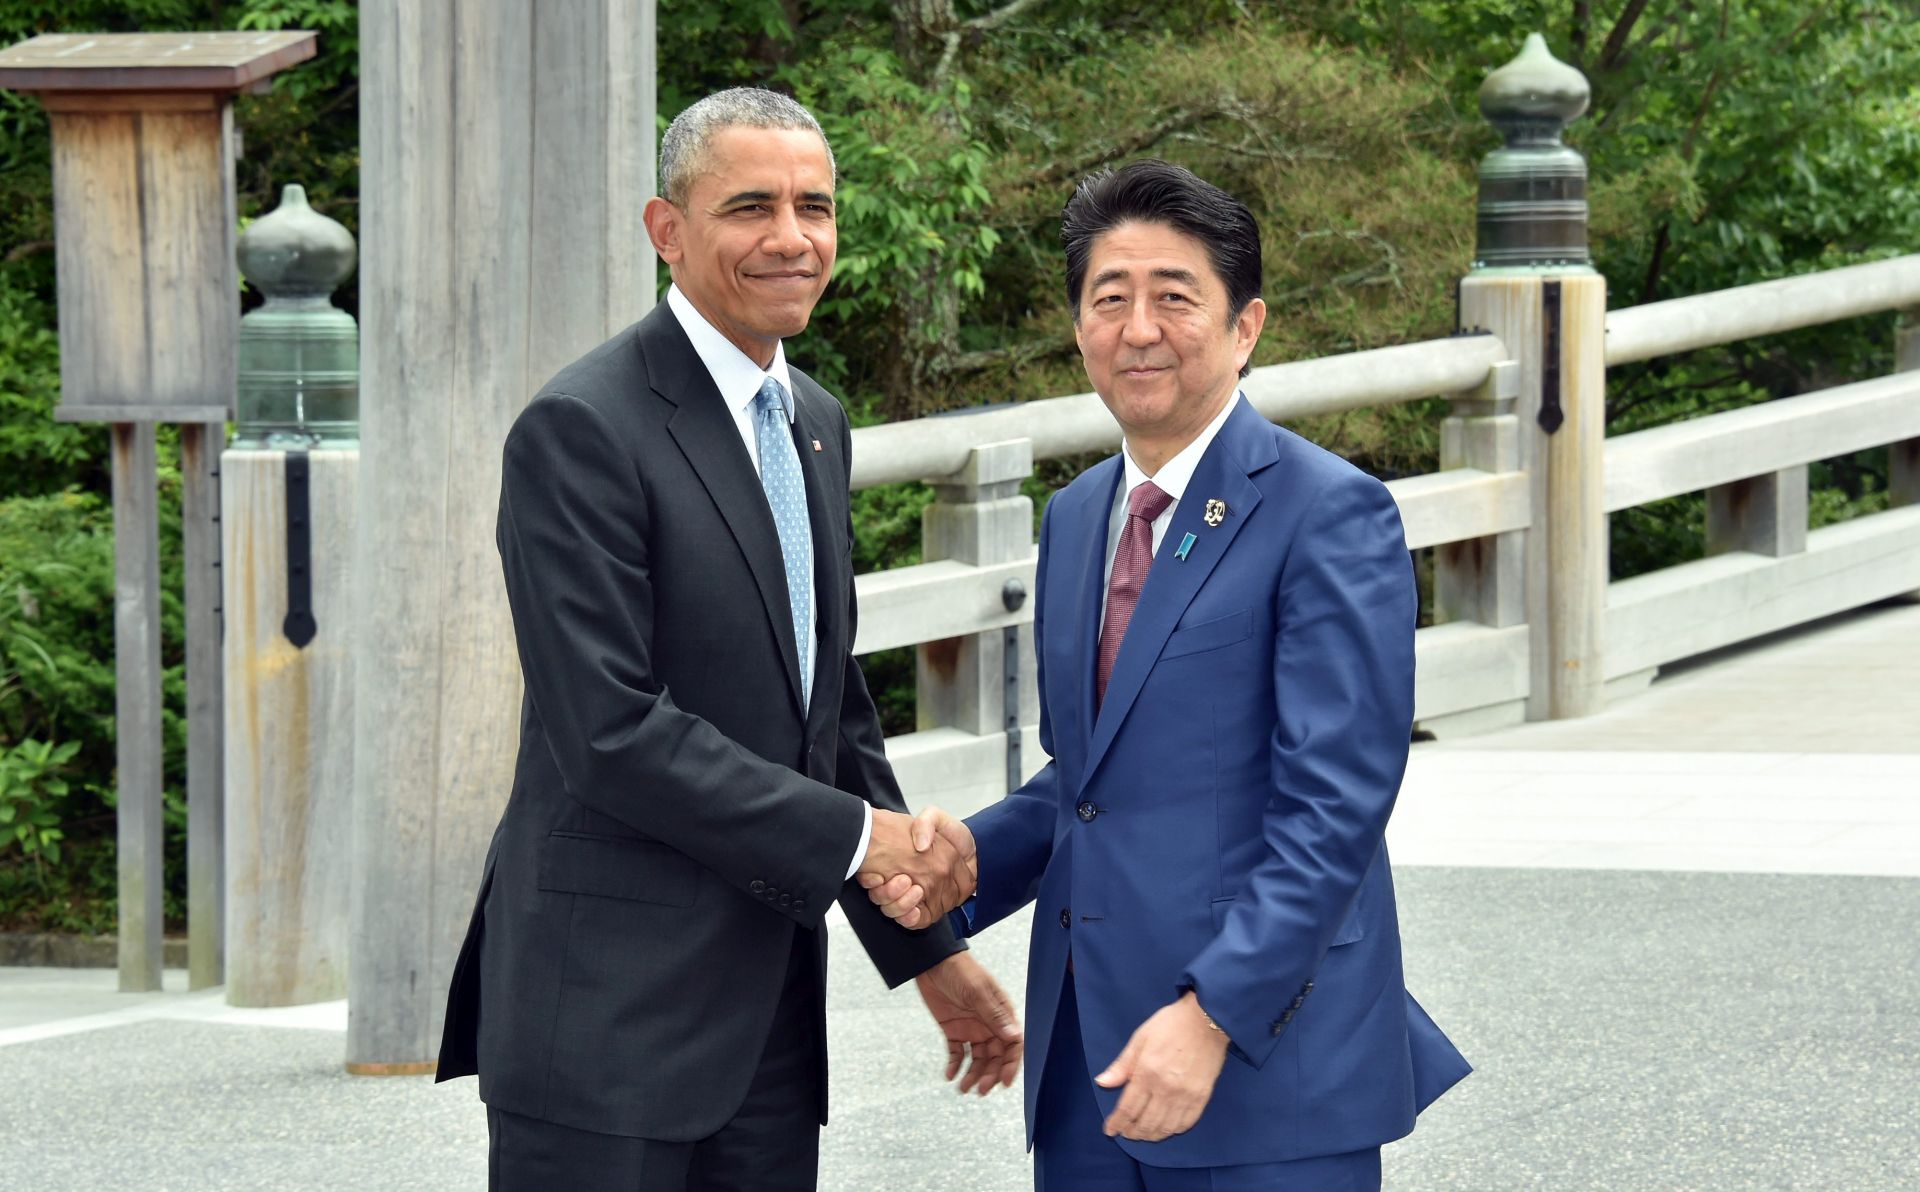 epa05329478 A handout picture made available by the Ministry of Foreign Affairs of Japan shows US President Barack Obama (L) welcomed by Japanese Prime Minister Shinzo Abe before their visit to the Ise Grand Shrine in Ise, Mie prefecture, Japan, 26 May 2016. Heads of state and government of the seven leading industrialized nations (G7) visited the shrine before the start of the 42nd G7 summit which is held from 26 to 27 May 2016.  EPA/MINISTRY OF FOREIGN AFFAIRS OF JAPAN / HANDOUT  HANDOUT EDITORIAL USE ONLY/NO SALES